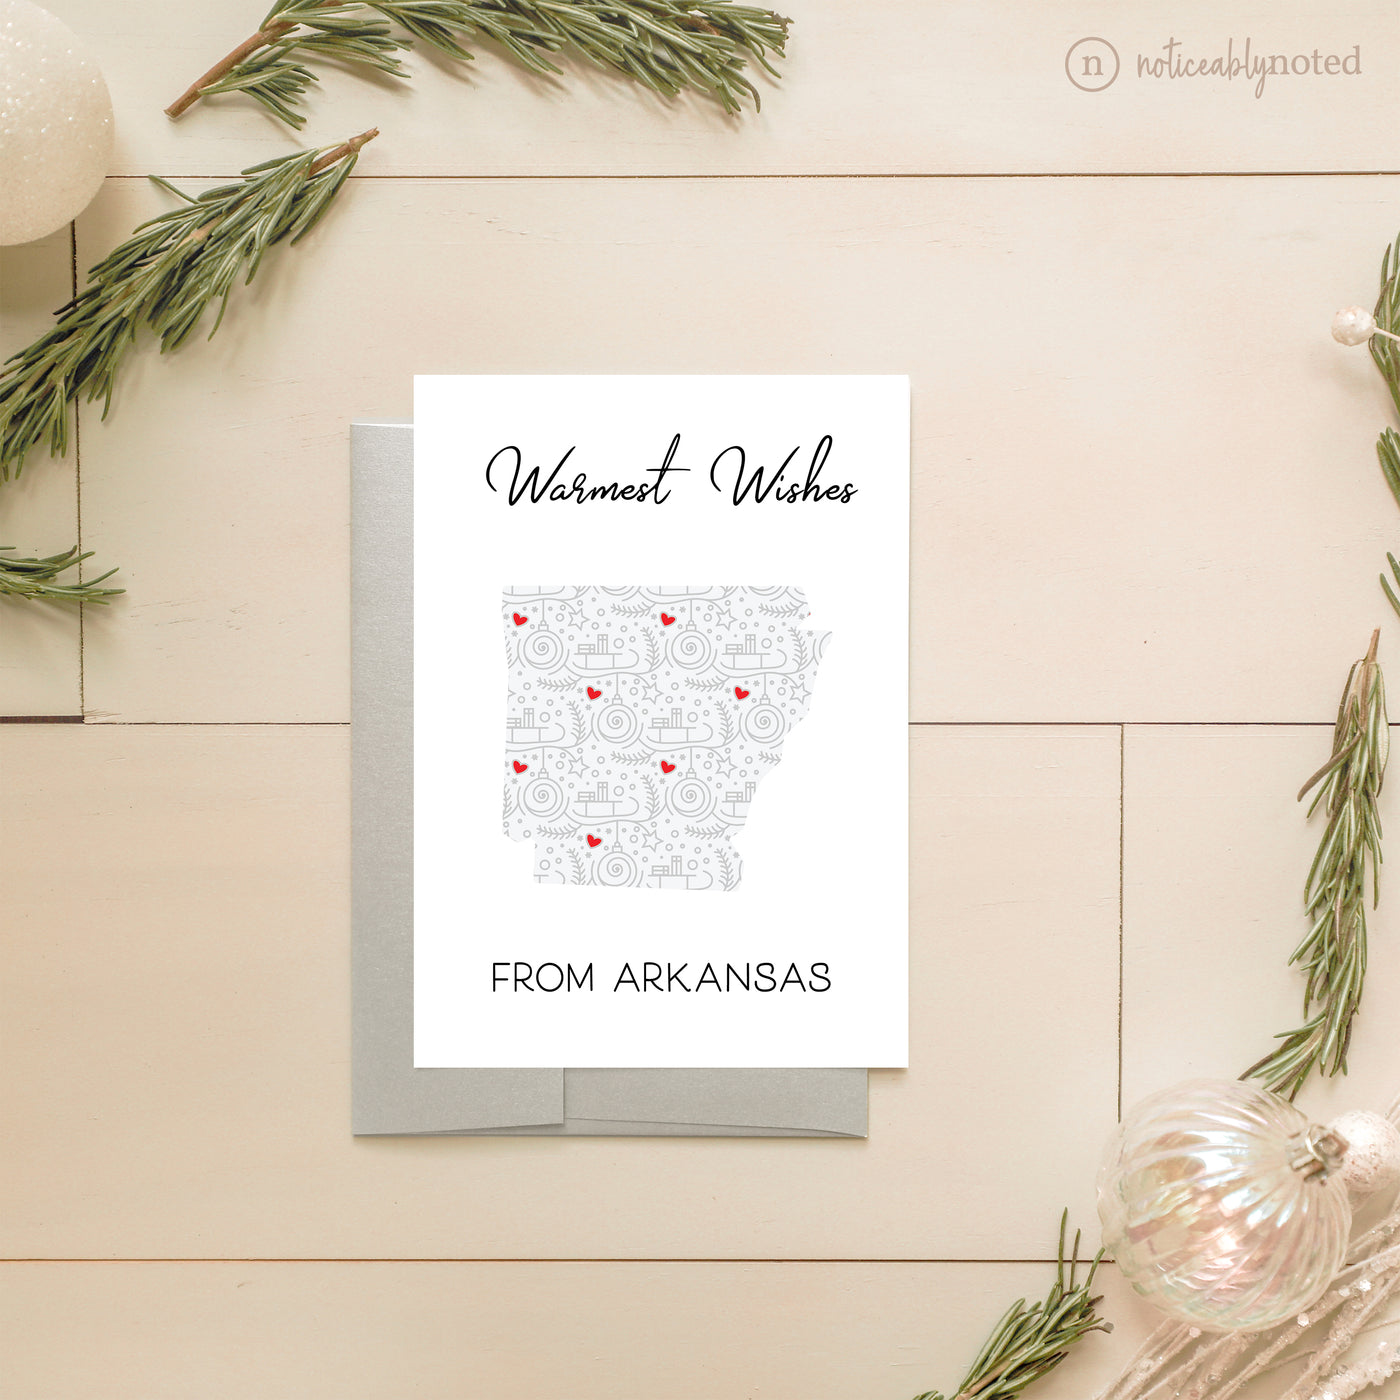 AR Holiday Greeting Cards | Noticeably Noted